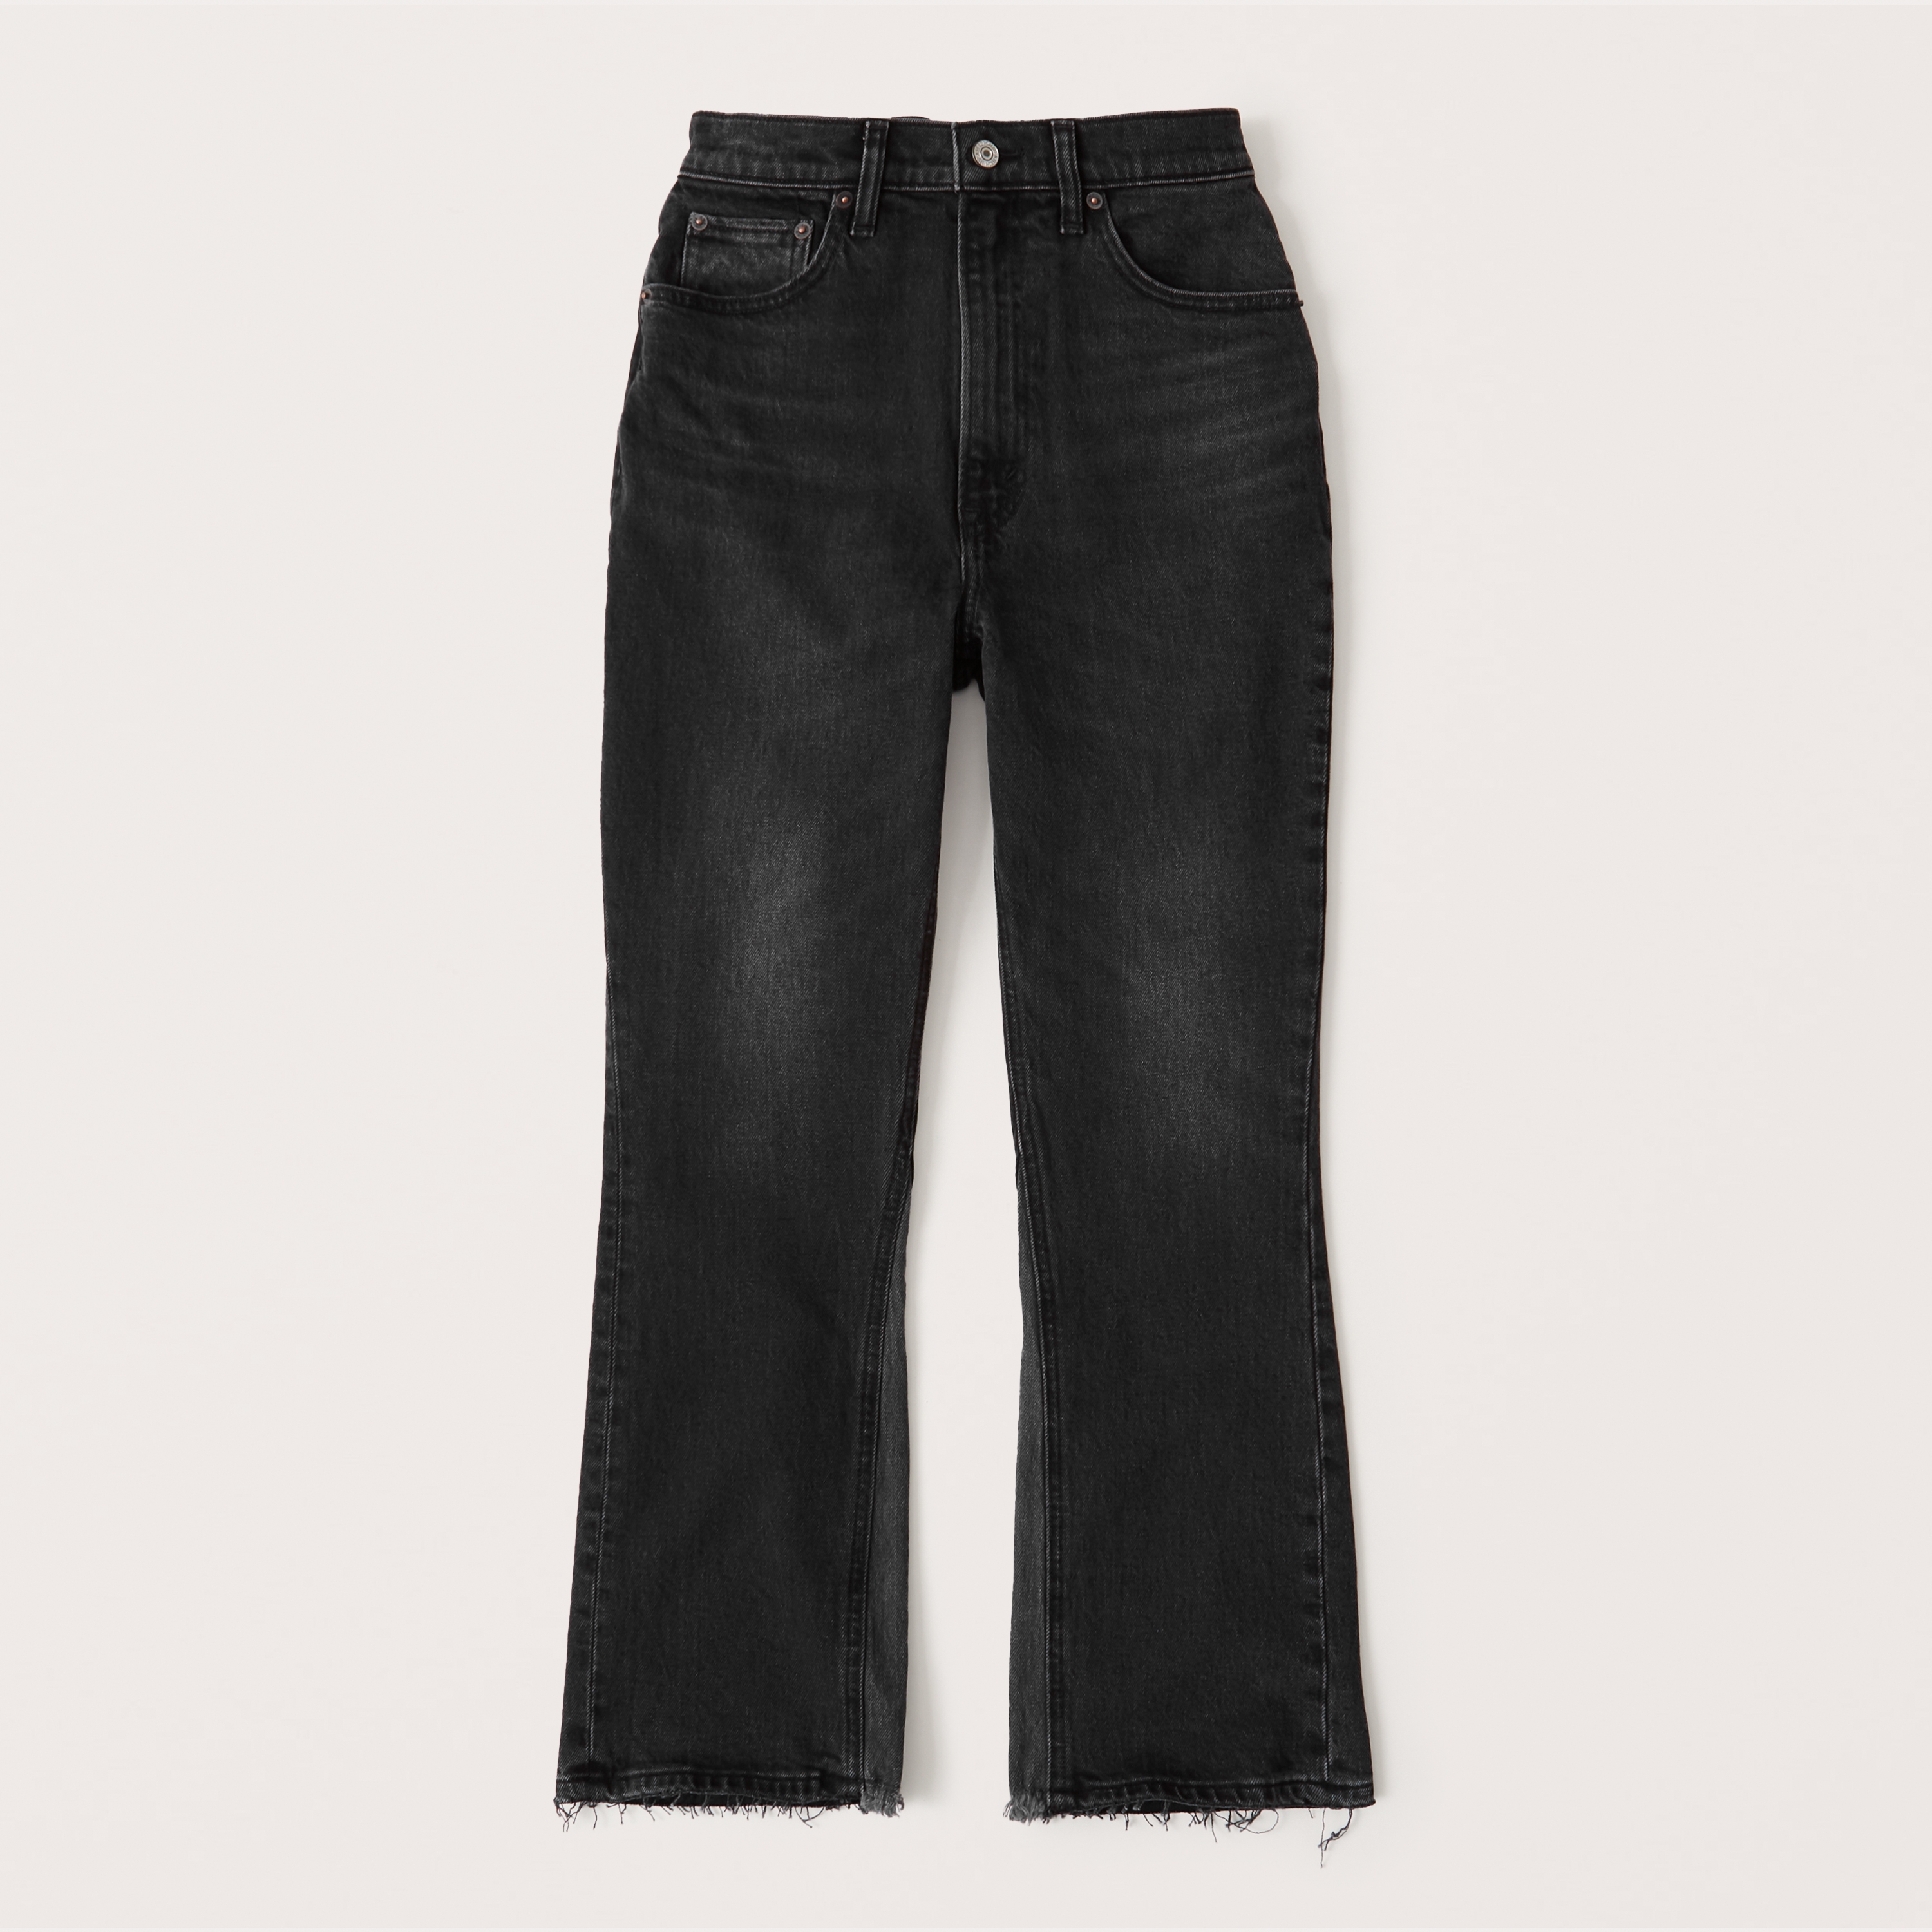 abercrombie & fitch flare jeans